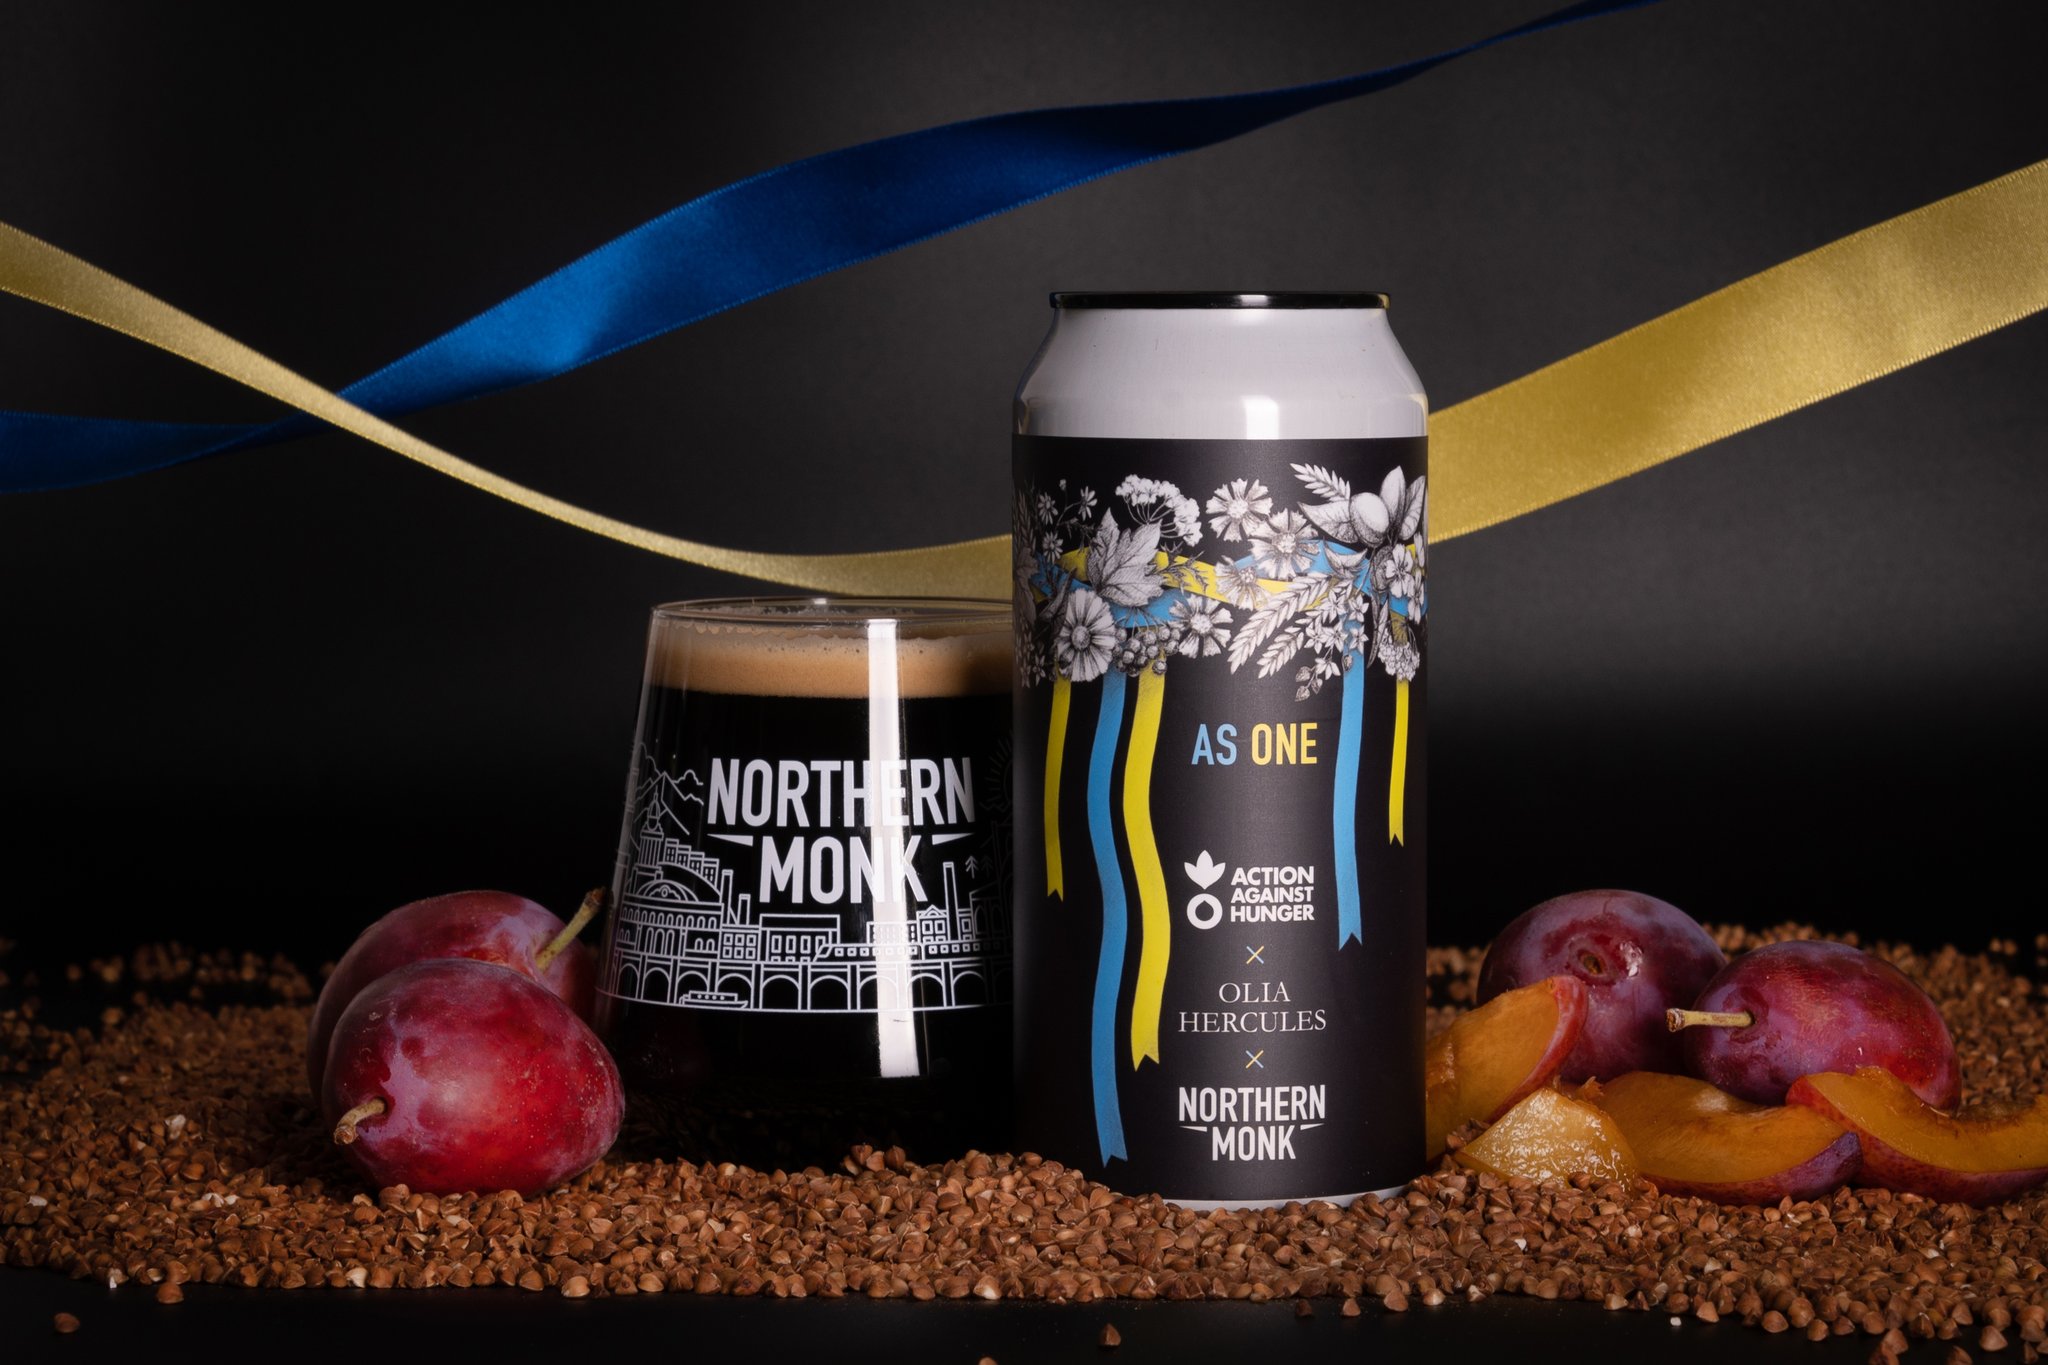 Northern Monk Brewery On Twitter 🇺🇦 As One We Got Together A Team To Celebrate Ukraine S